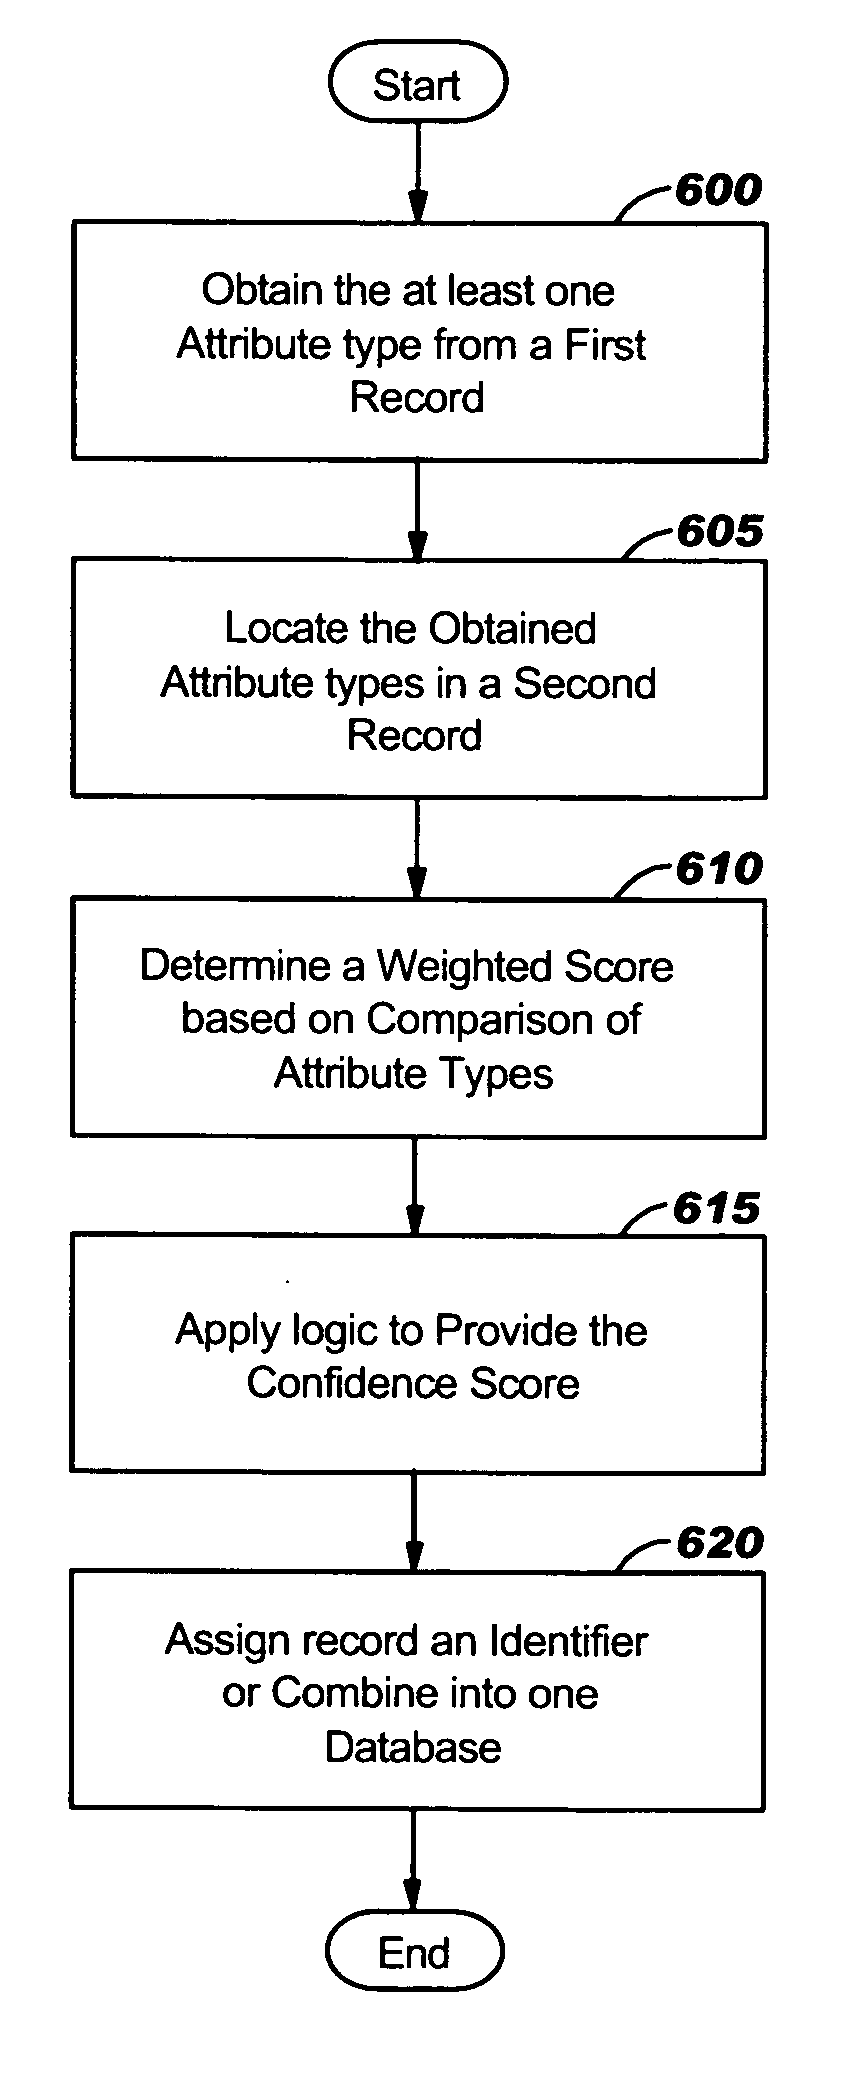 Methods, systems and computer program products for associating records in healthcare databases with individuals